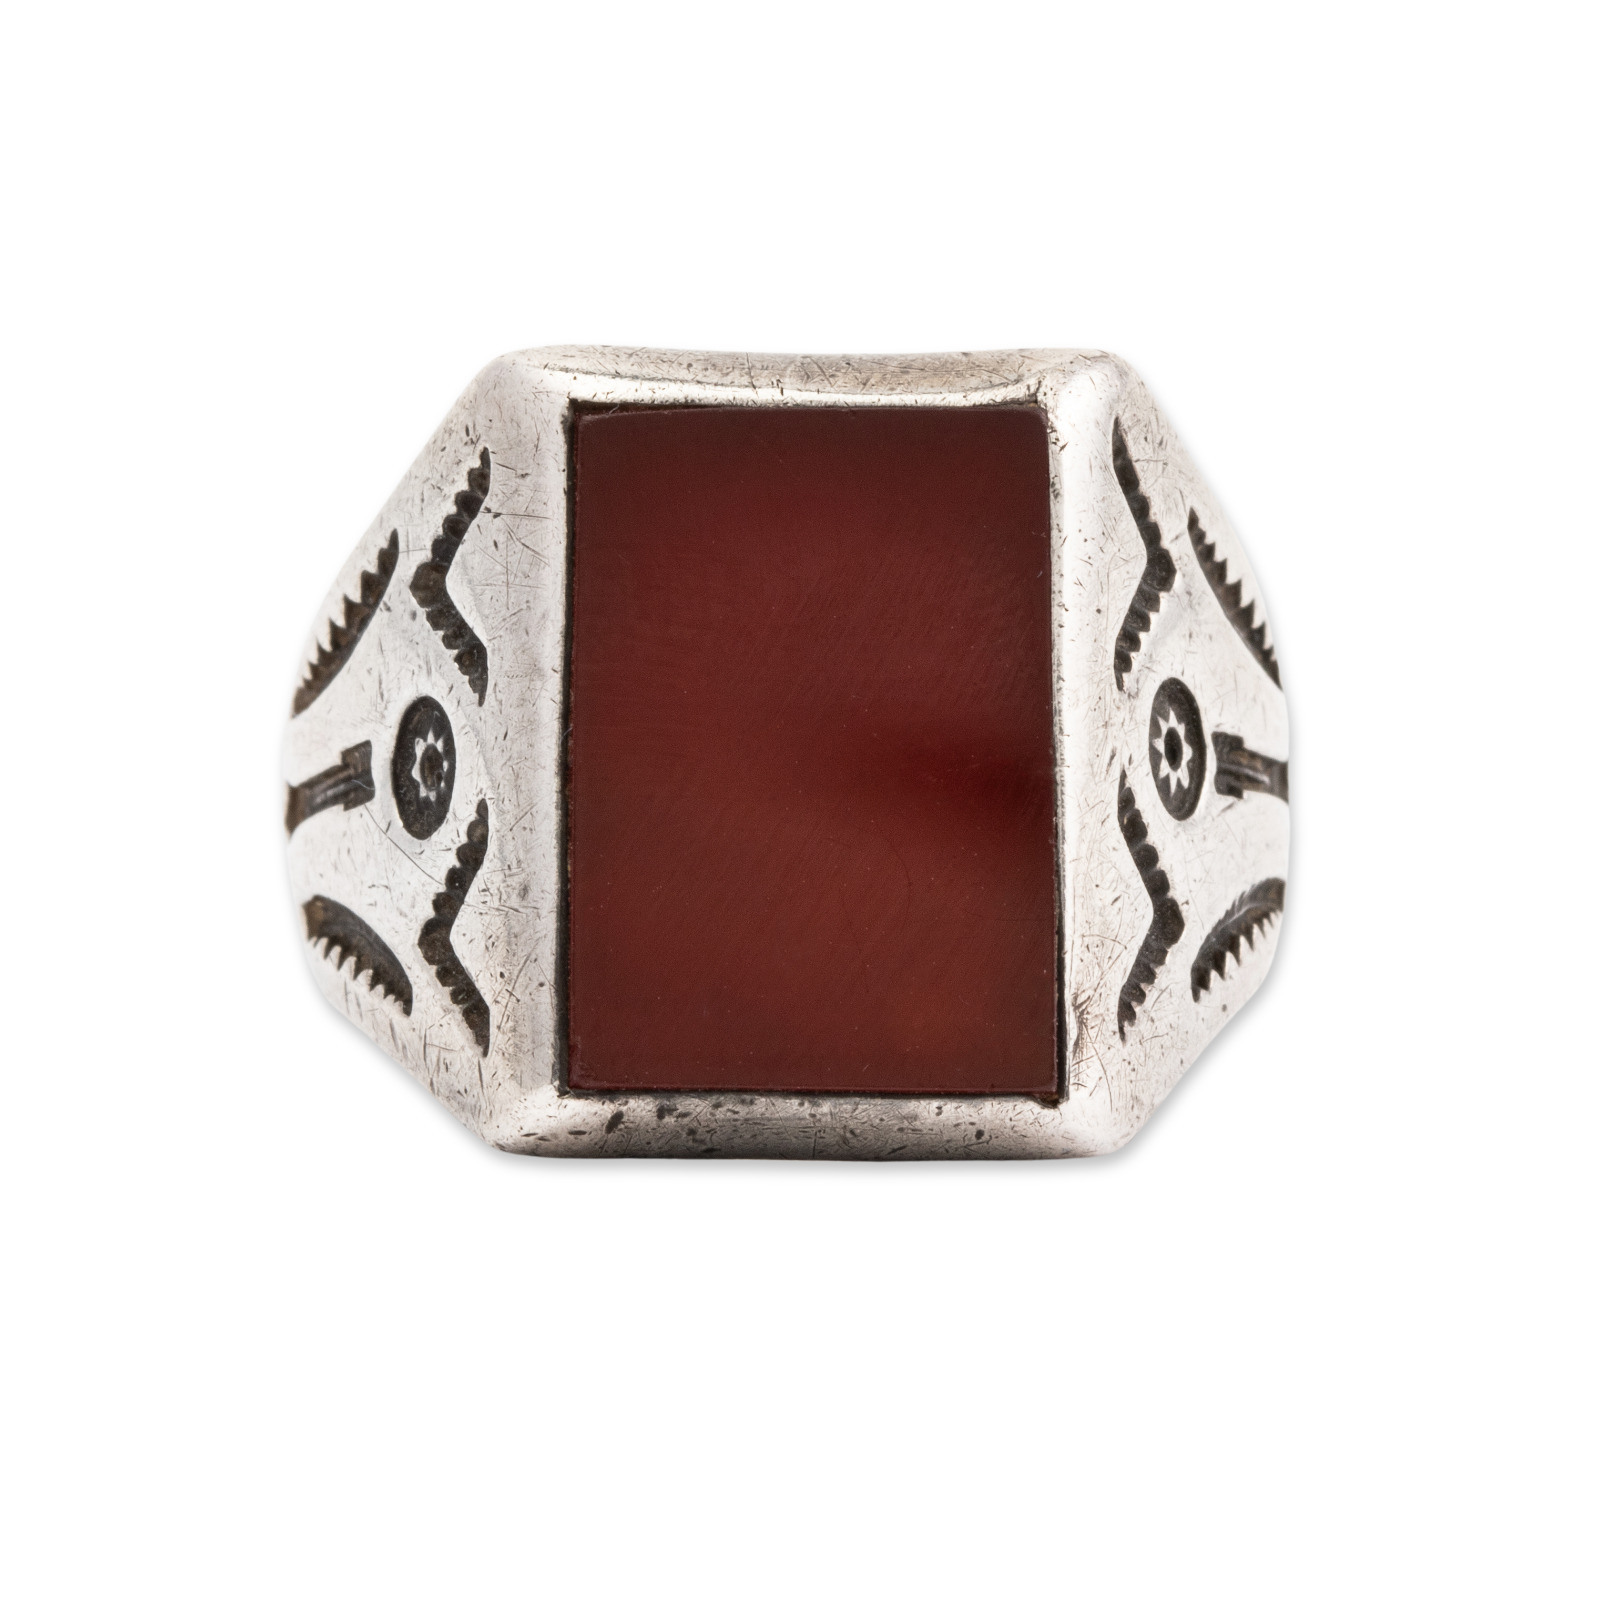 LARGE NATIVE AMERICAN STERLING SILVER CARNELIAN ARROW STAMPS SIGNET RING 10.75